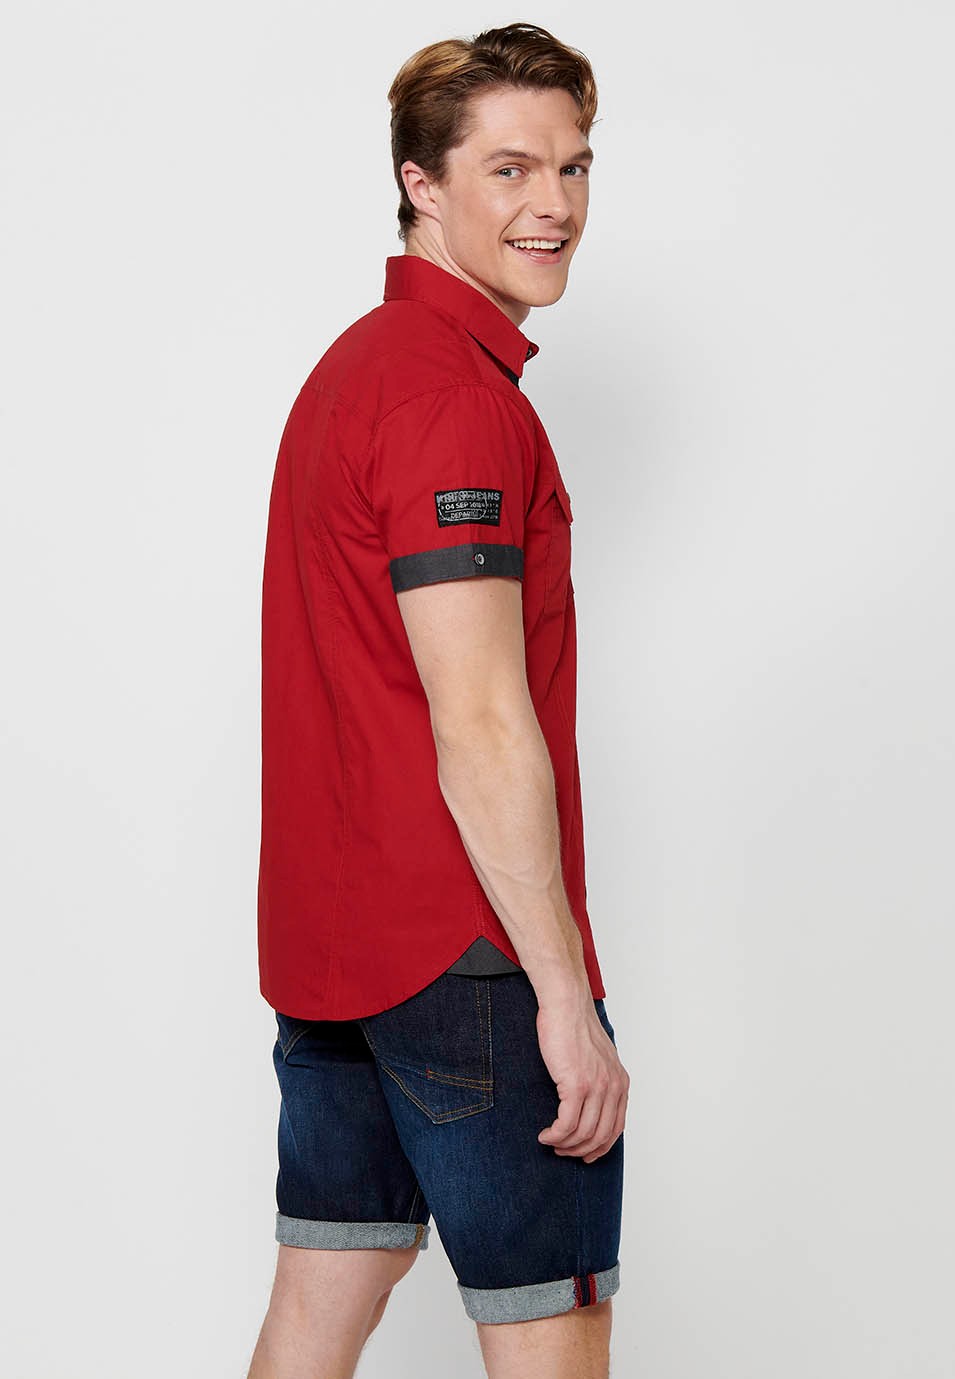 Short Sleeve Cotton Shirt with Button Front Closure and Front Flap Pockets in red Color for Men